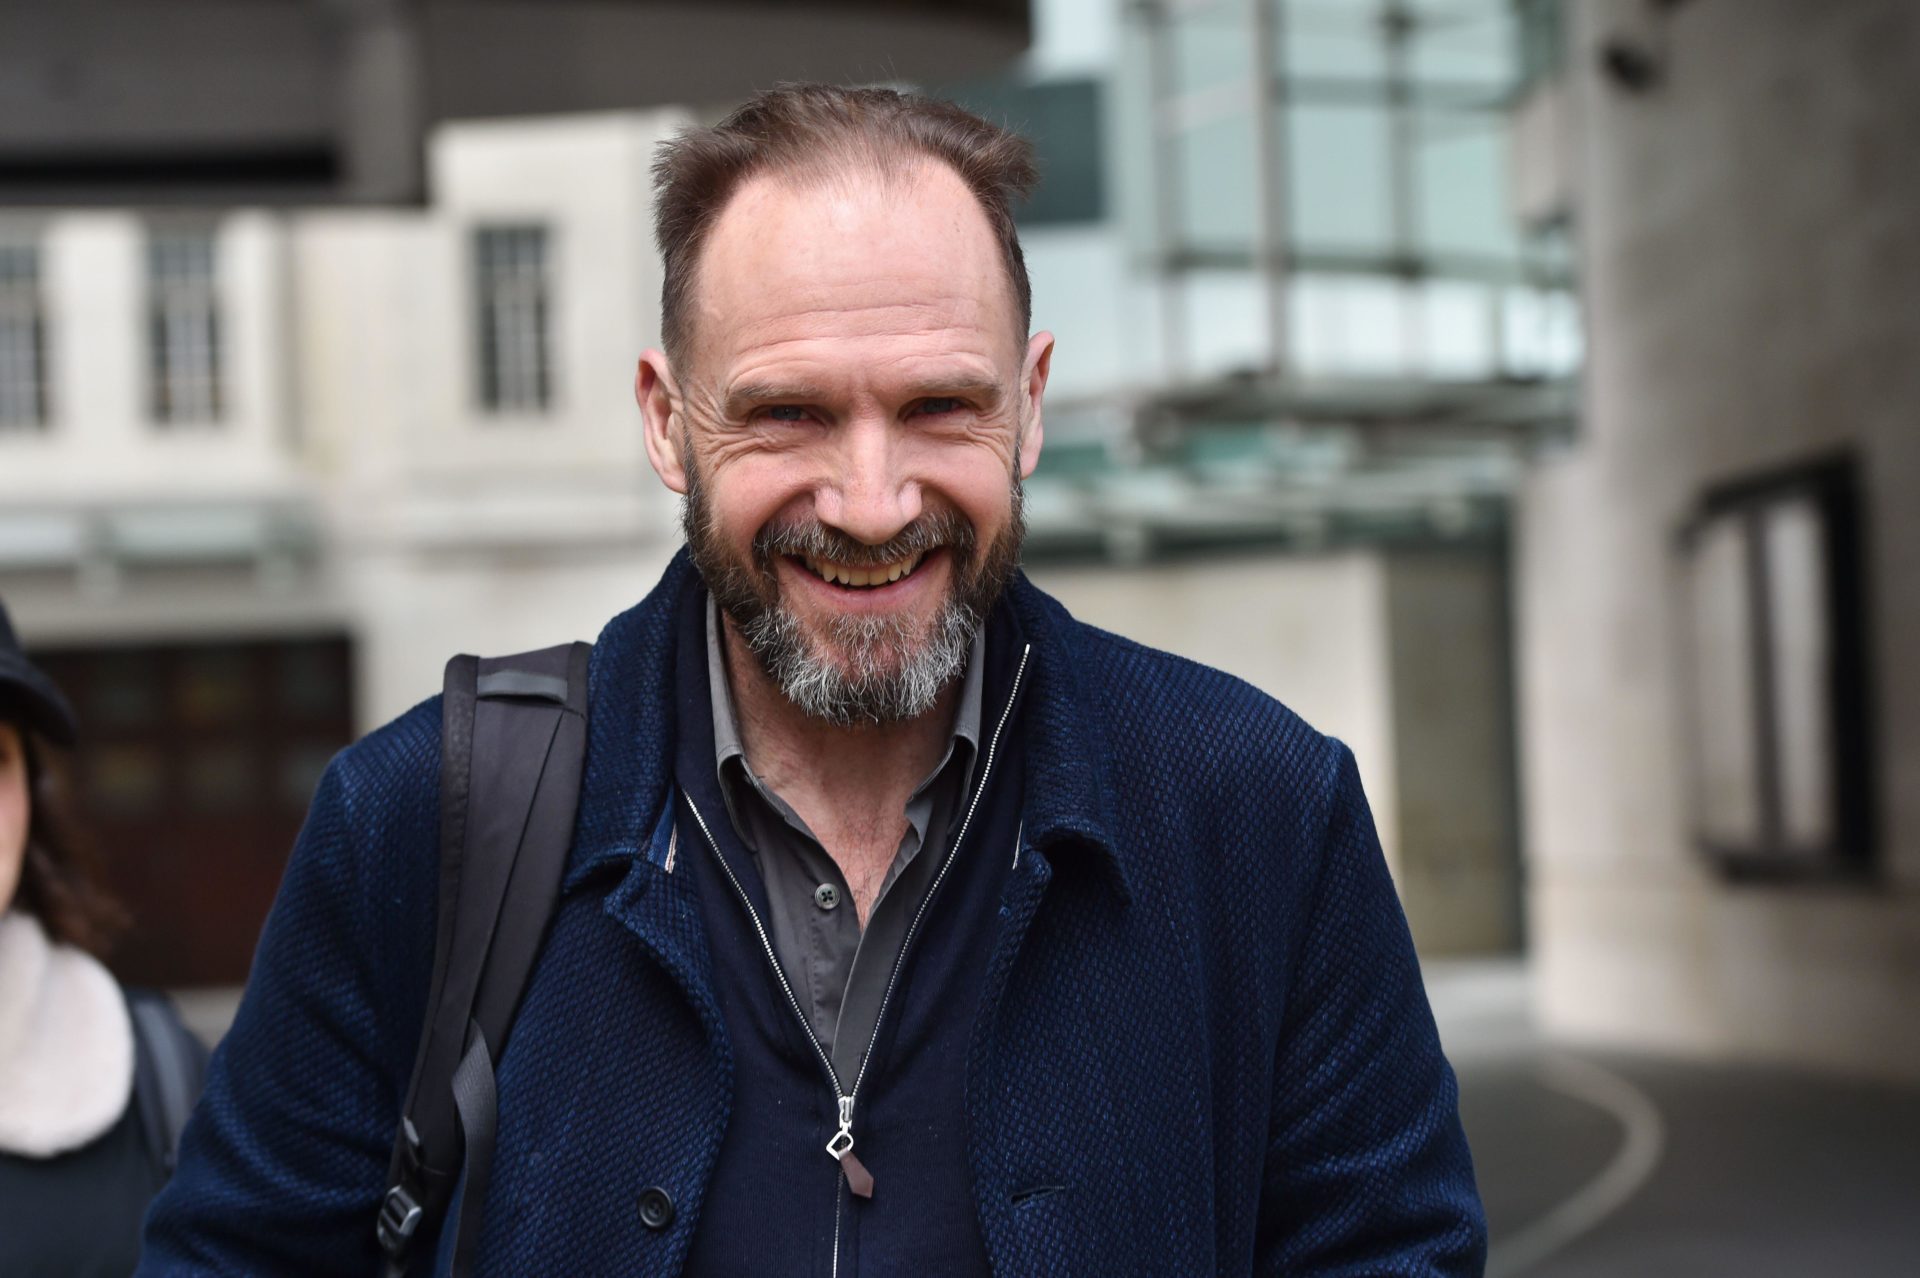 Actor and film producer Ralph Fiennes walking out of the BBC Studios after his appearance on Sunday With Laura Kuenssberg